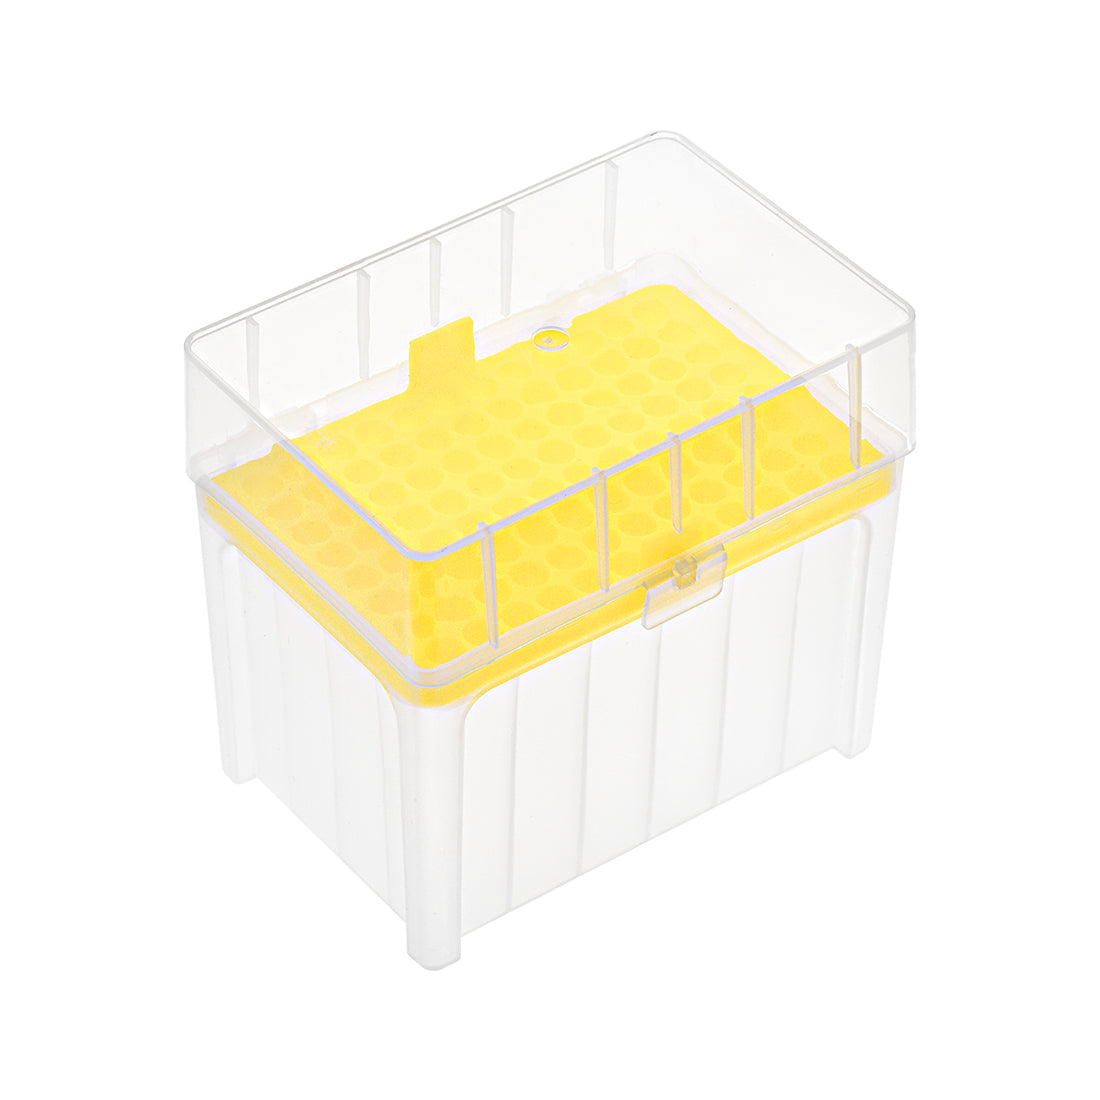 uxcell Uxcell Pipette Tips Box 96-Well Polypropylene Tip Holder Container for 1ml/1000ul Pipettor 7.5mm Hole Diameter Yellow